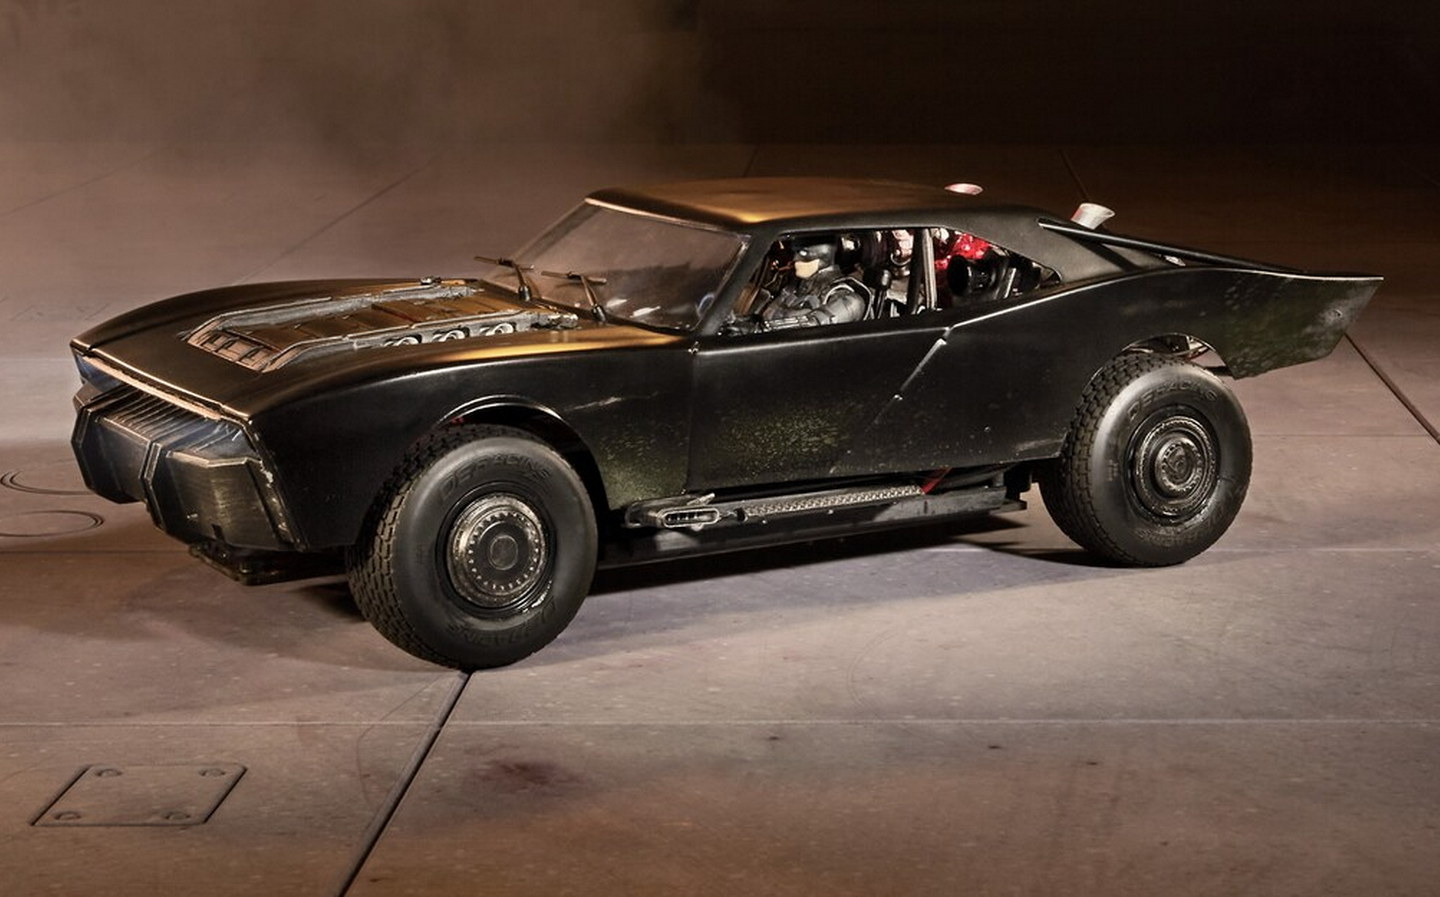 This Batmobile is for sale and it costs the same as a Bugatti Veyron